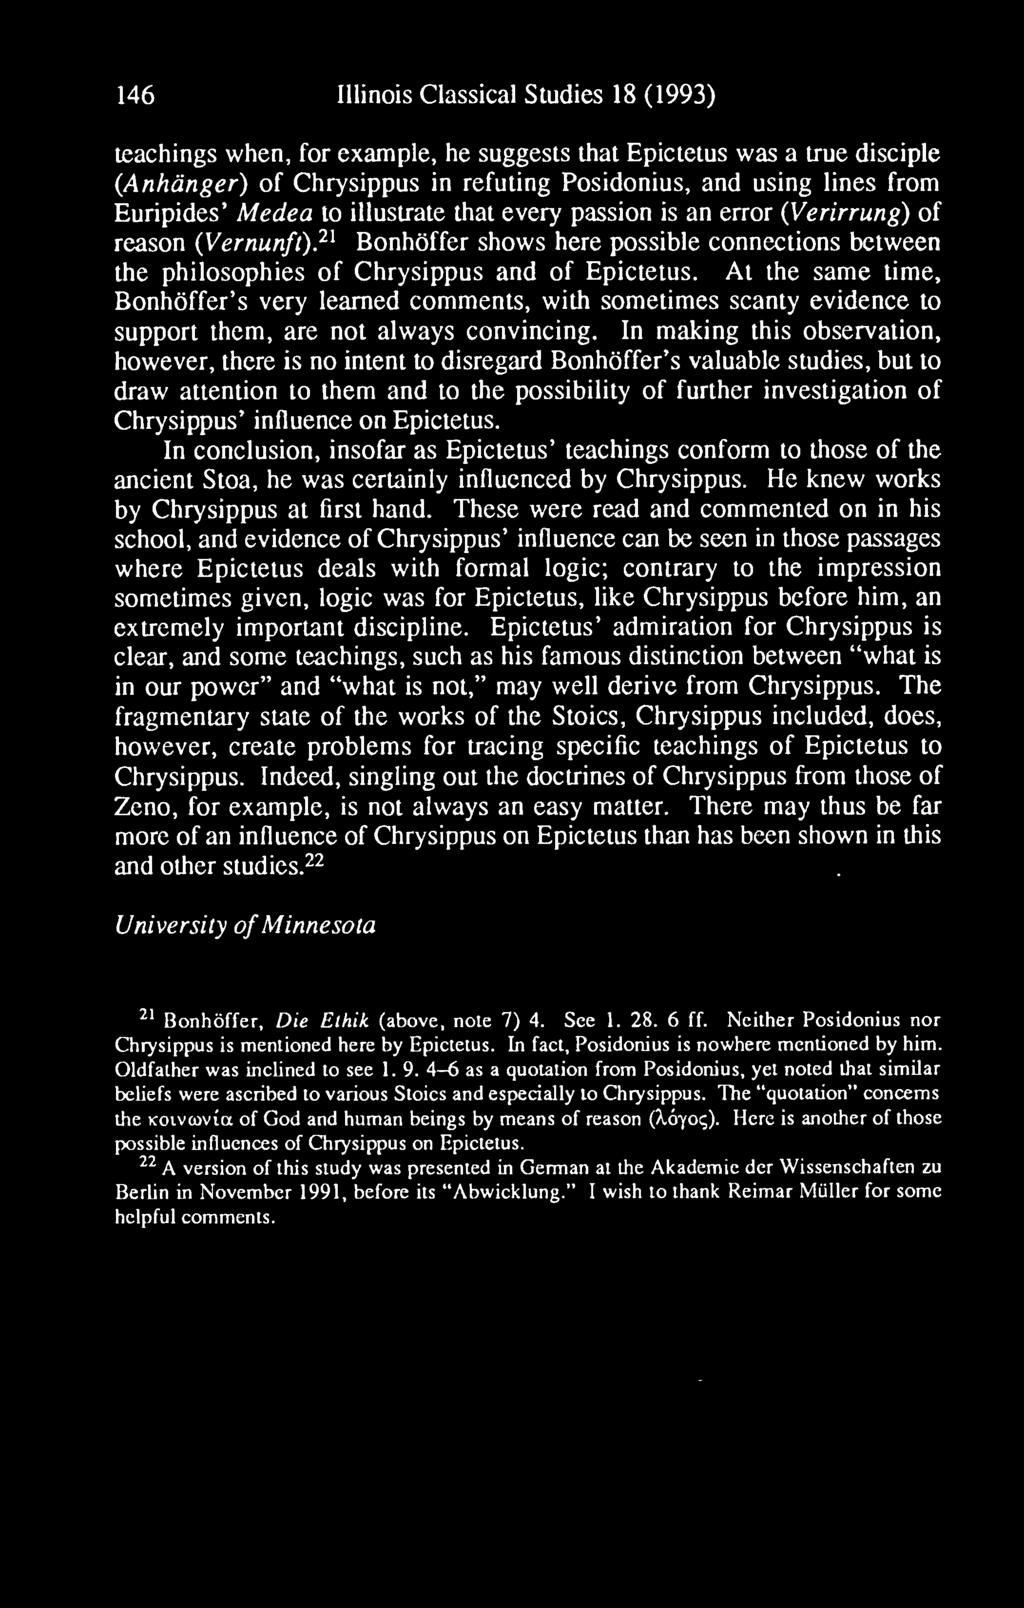 146 Illinois Classical Studies 18 (1993) teachings when, for example, he suggests that Epictetus was a true disciple {Anhdnger) of Chrysippus in refuting Posidonius, and using lines from Euripides'